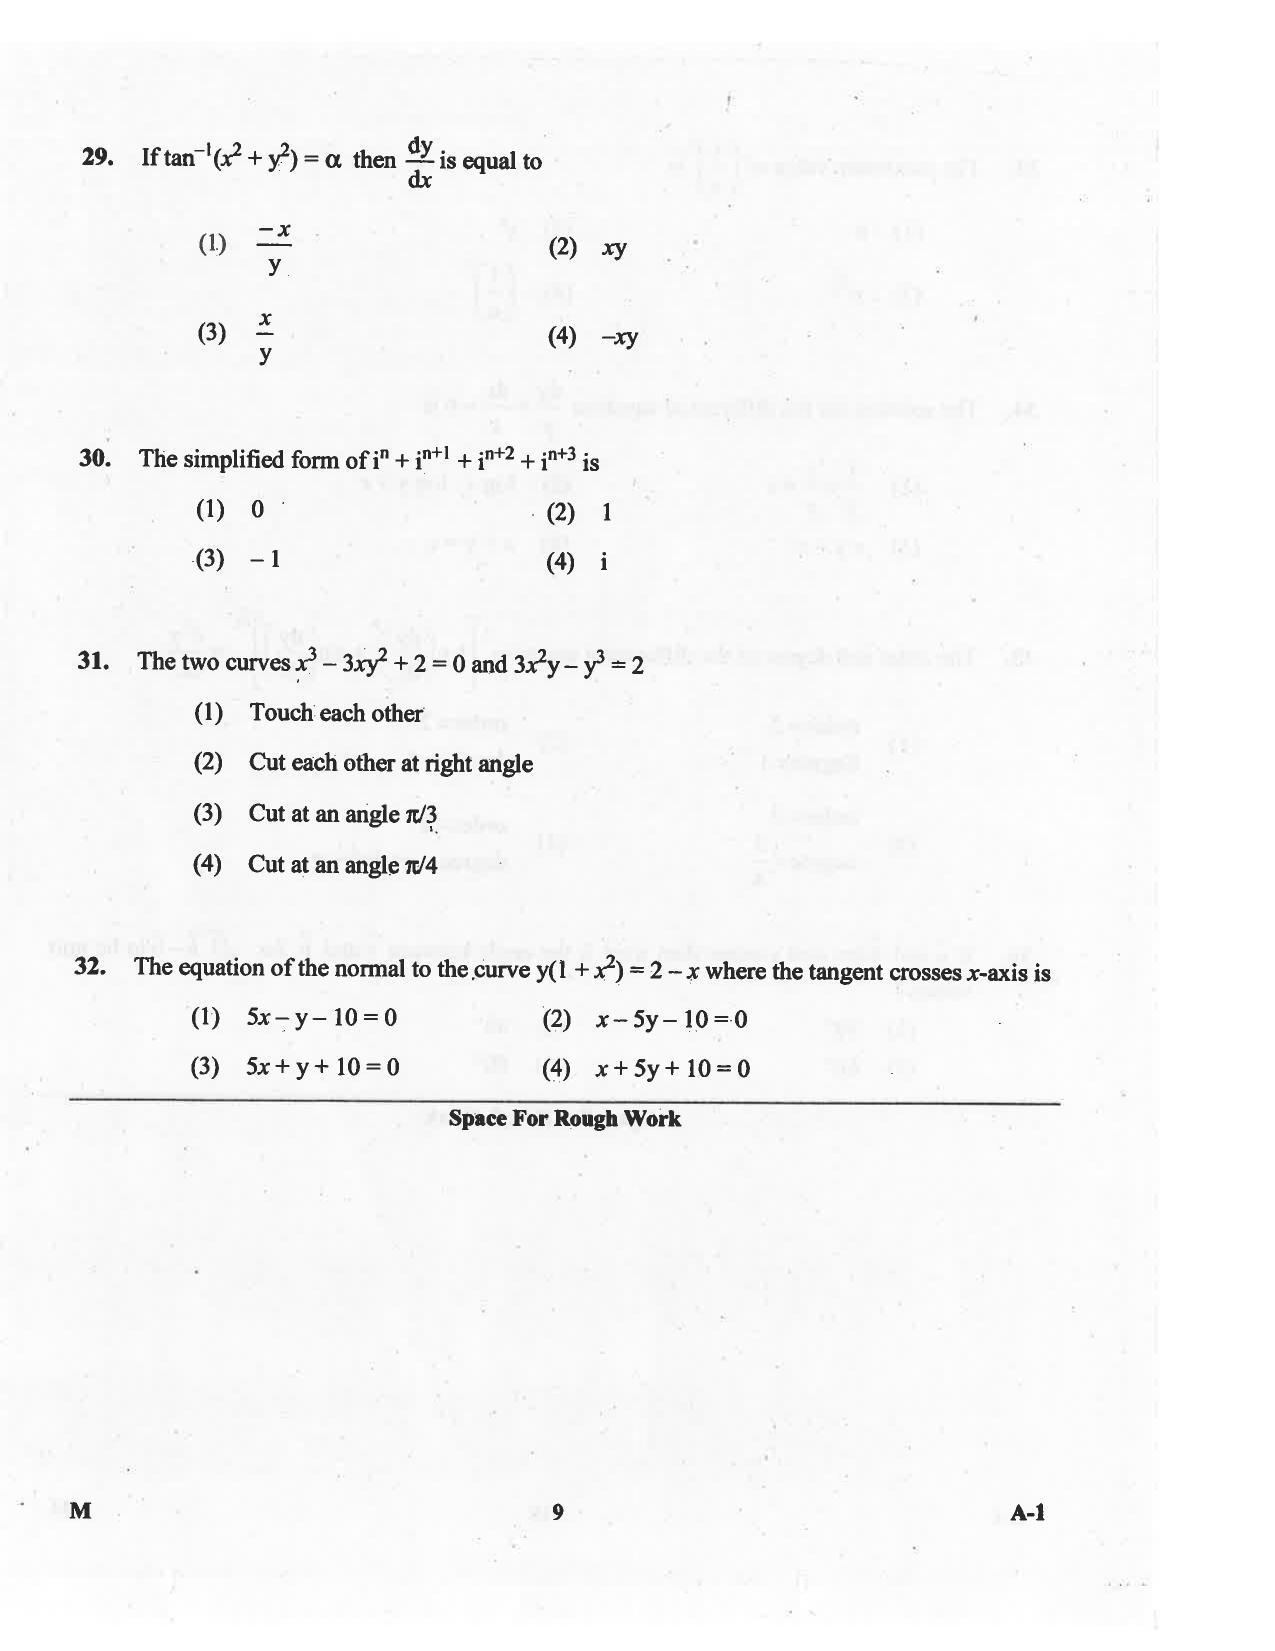 KCET Mathematics 2016 Question Papers - Page 9